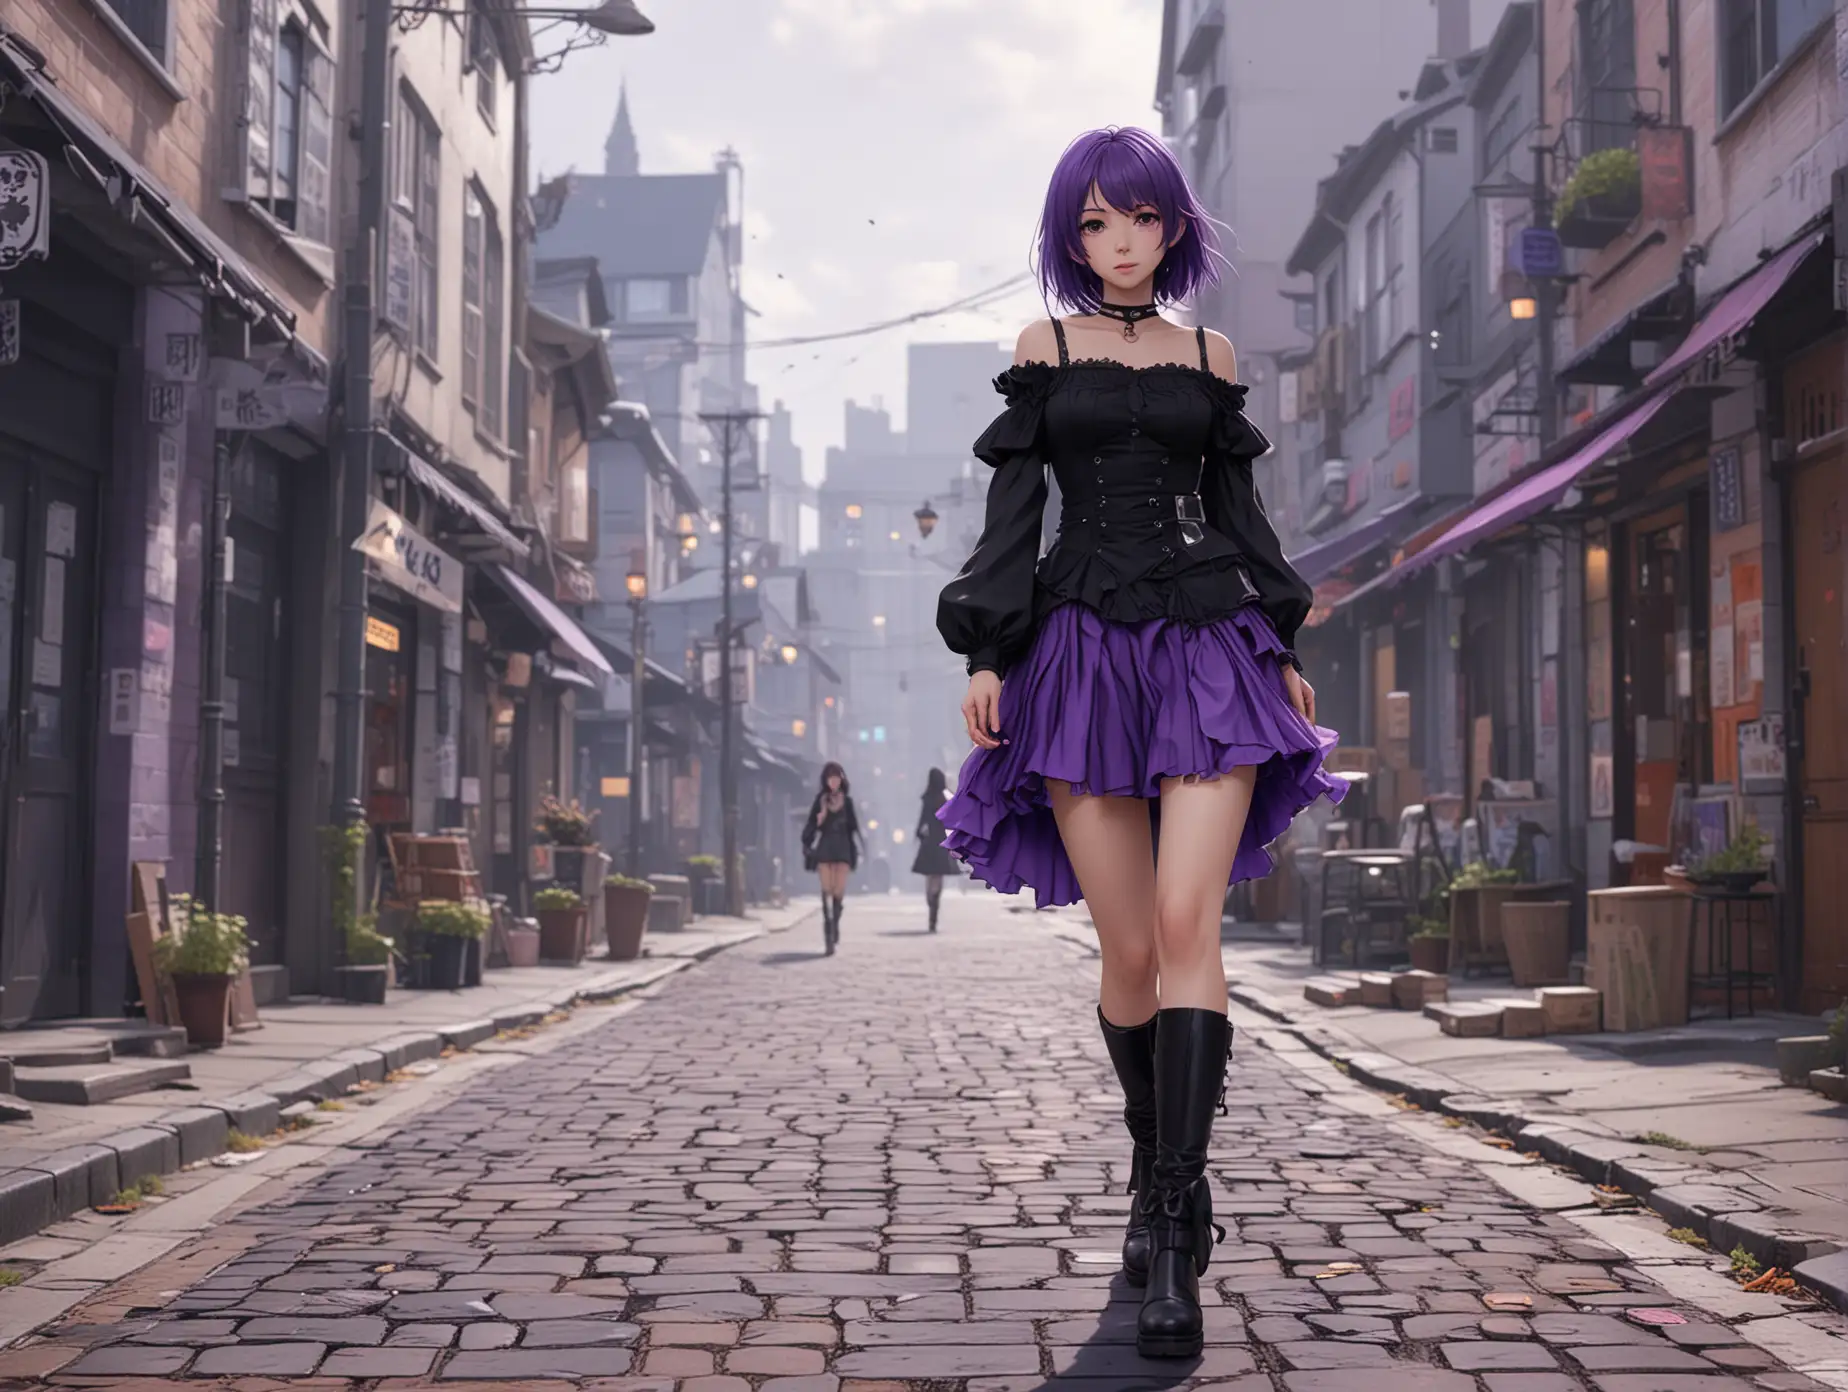 Gothic-Anime-Girl-in-Purple-Skirt-and-Black-Boots-Walking